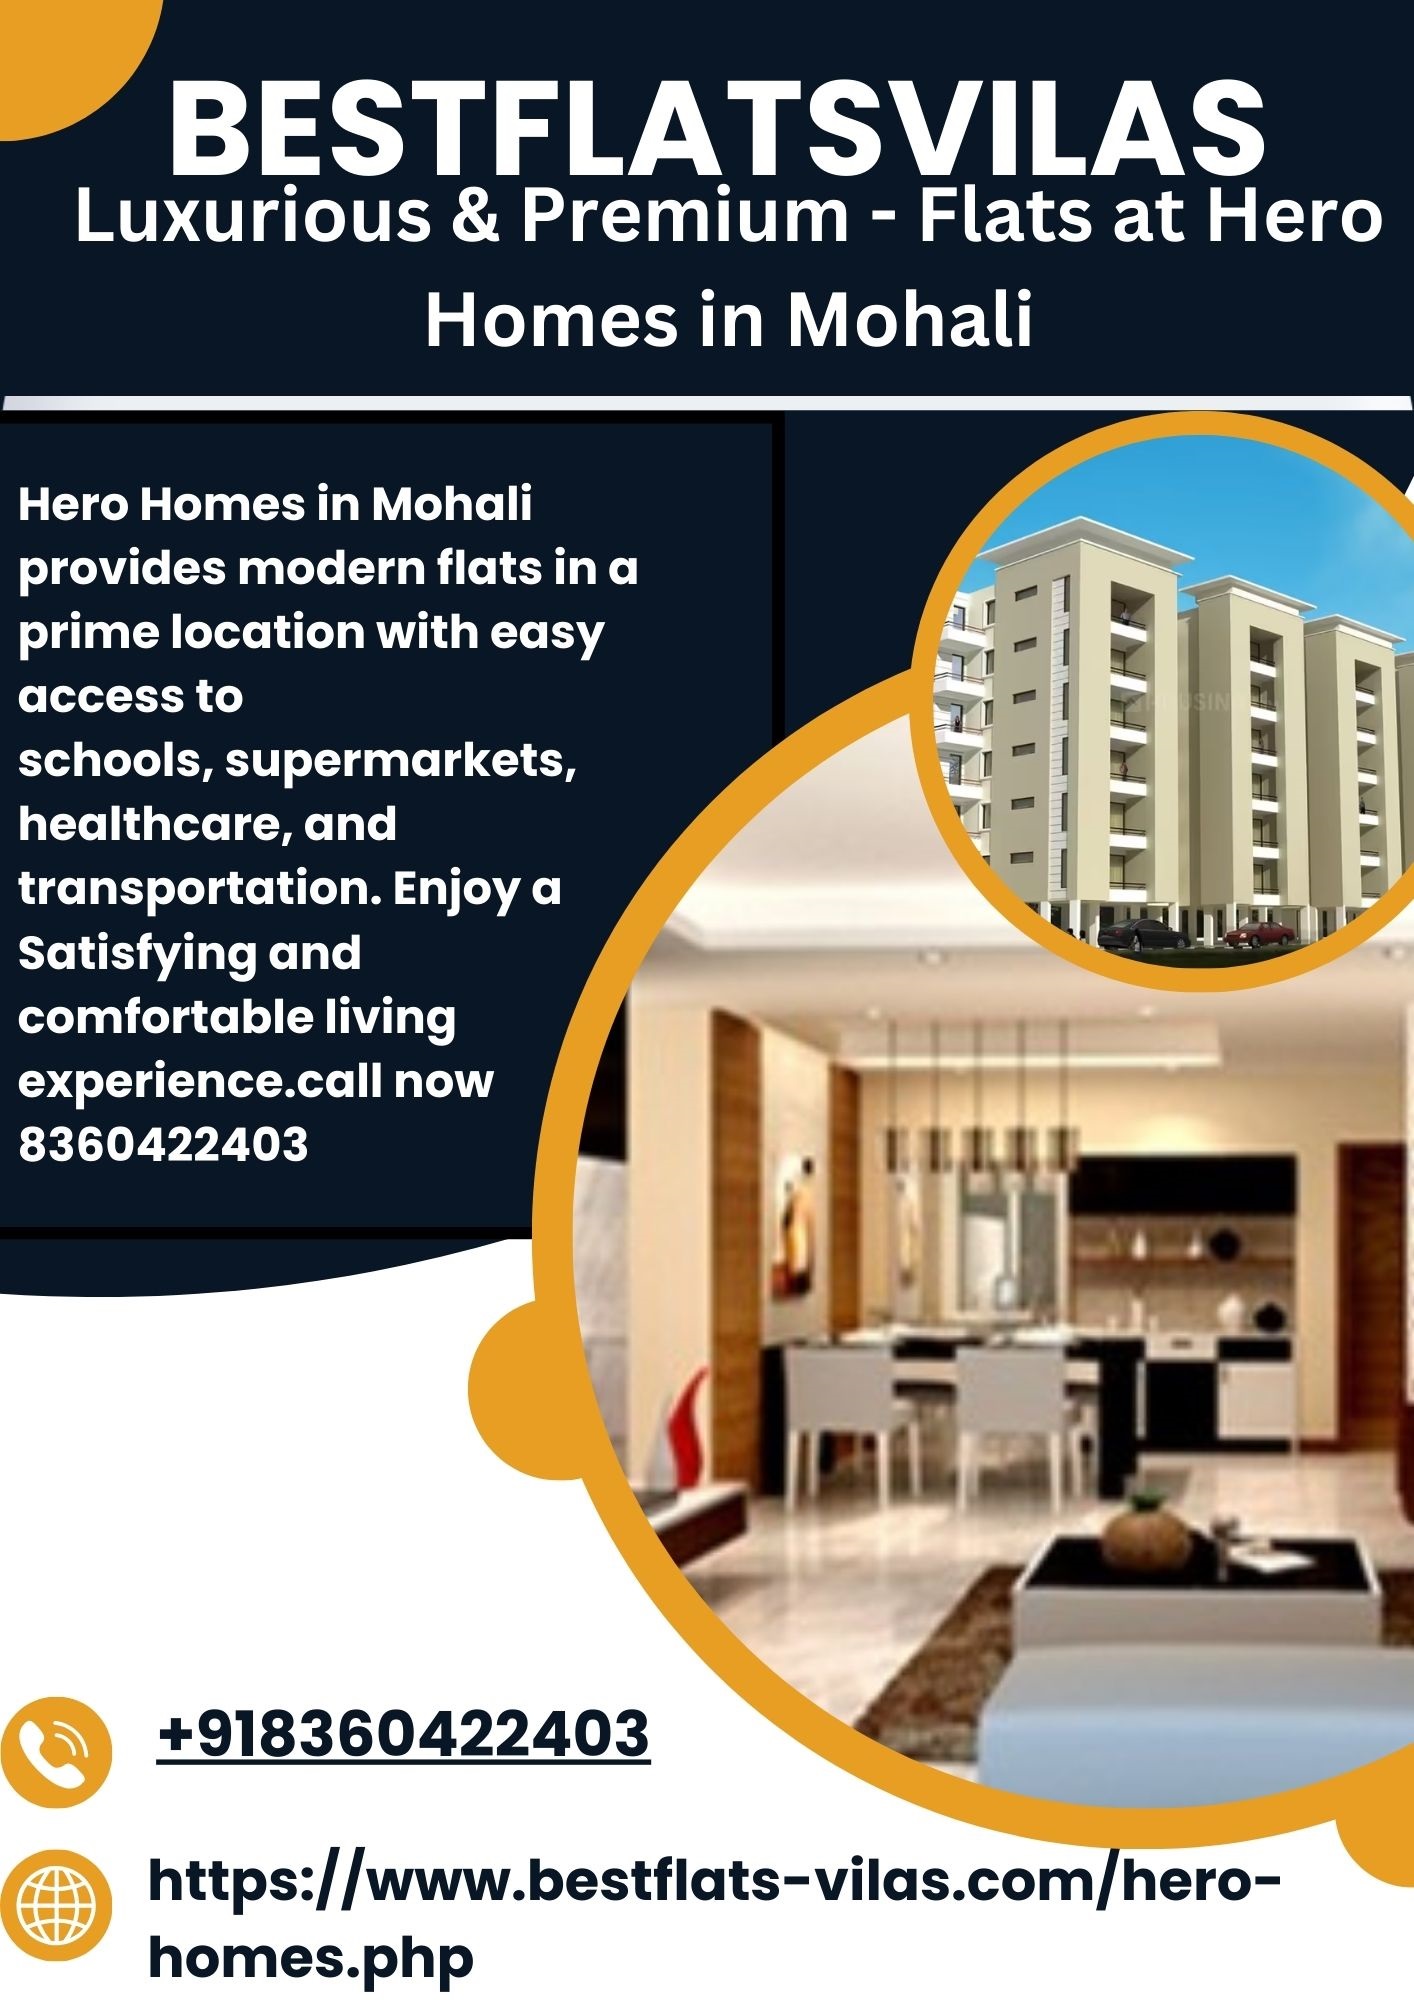 Luxurious & Premium - Flats at Hero Homes in Mohali